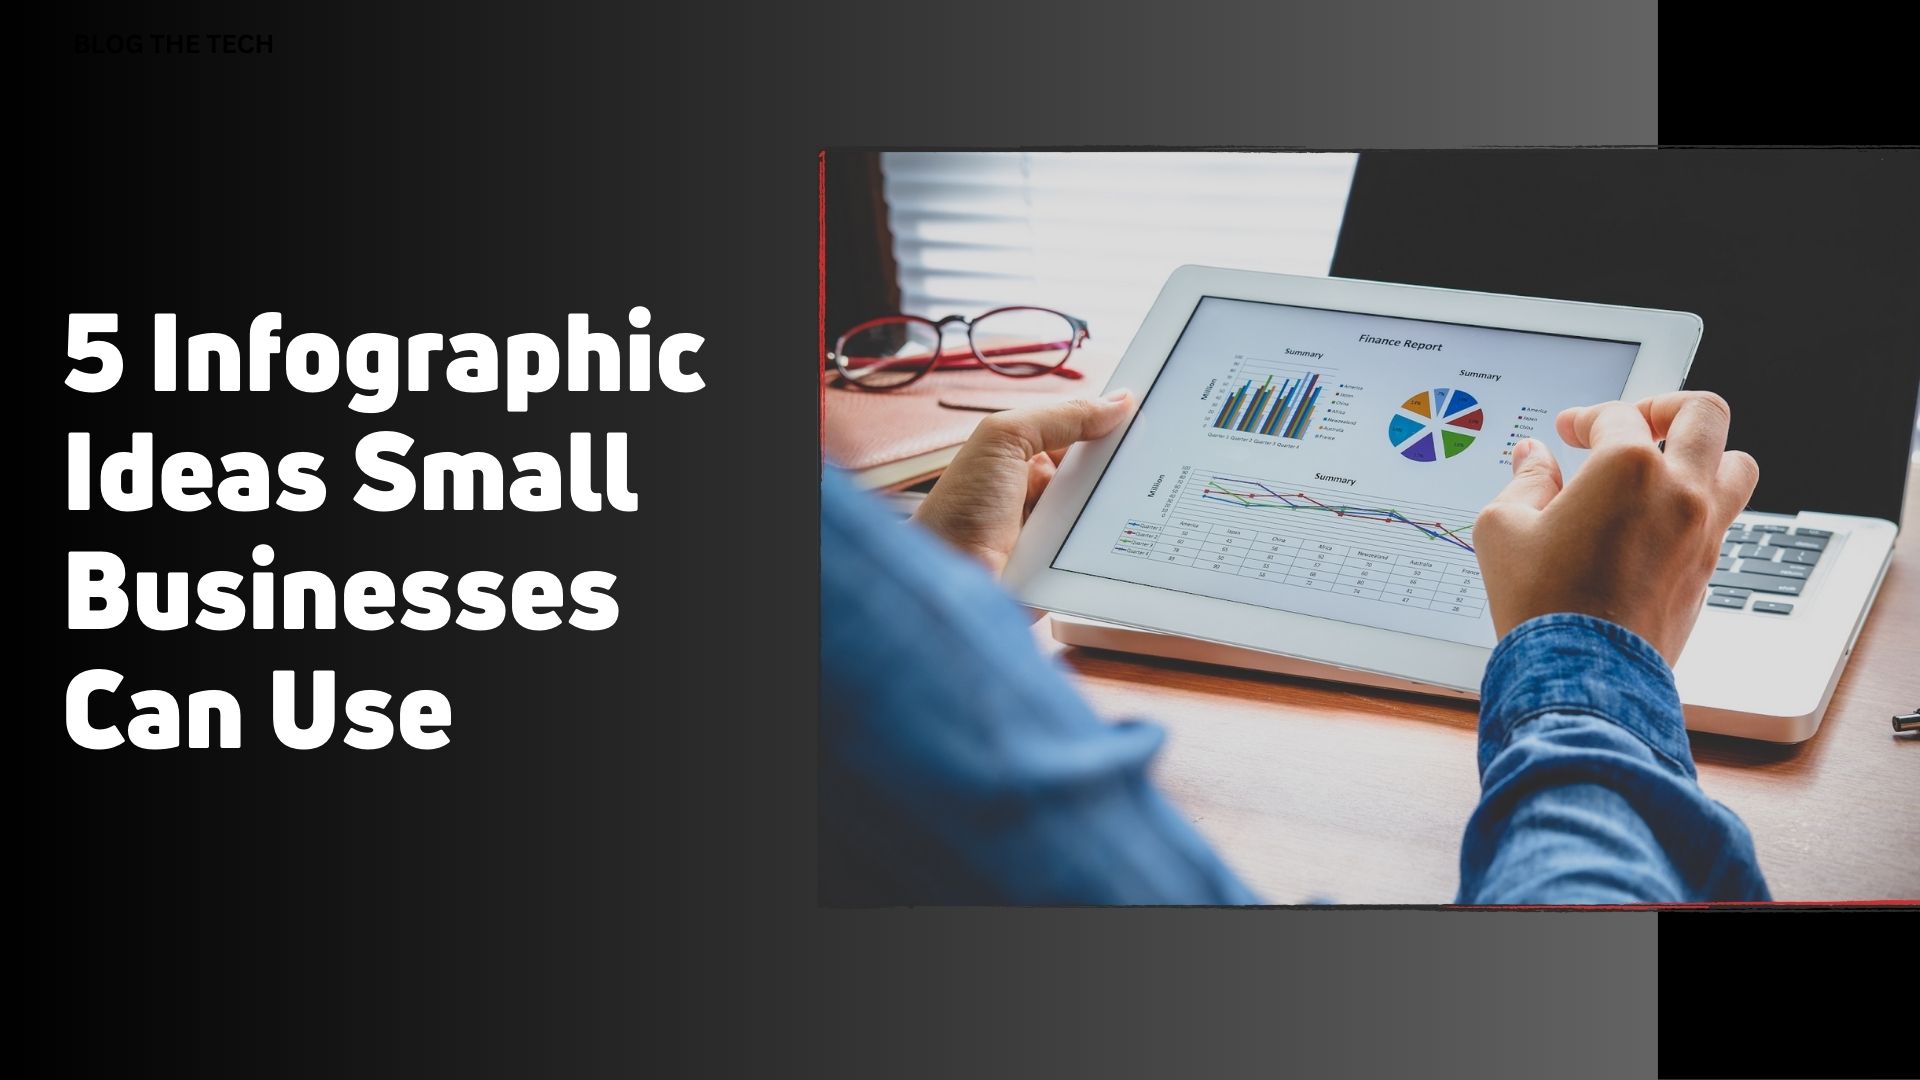 5 Infographic Ideas Small Businesses Can Use